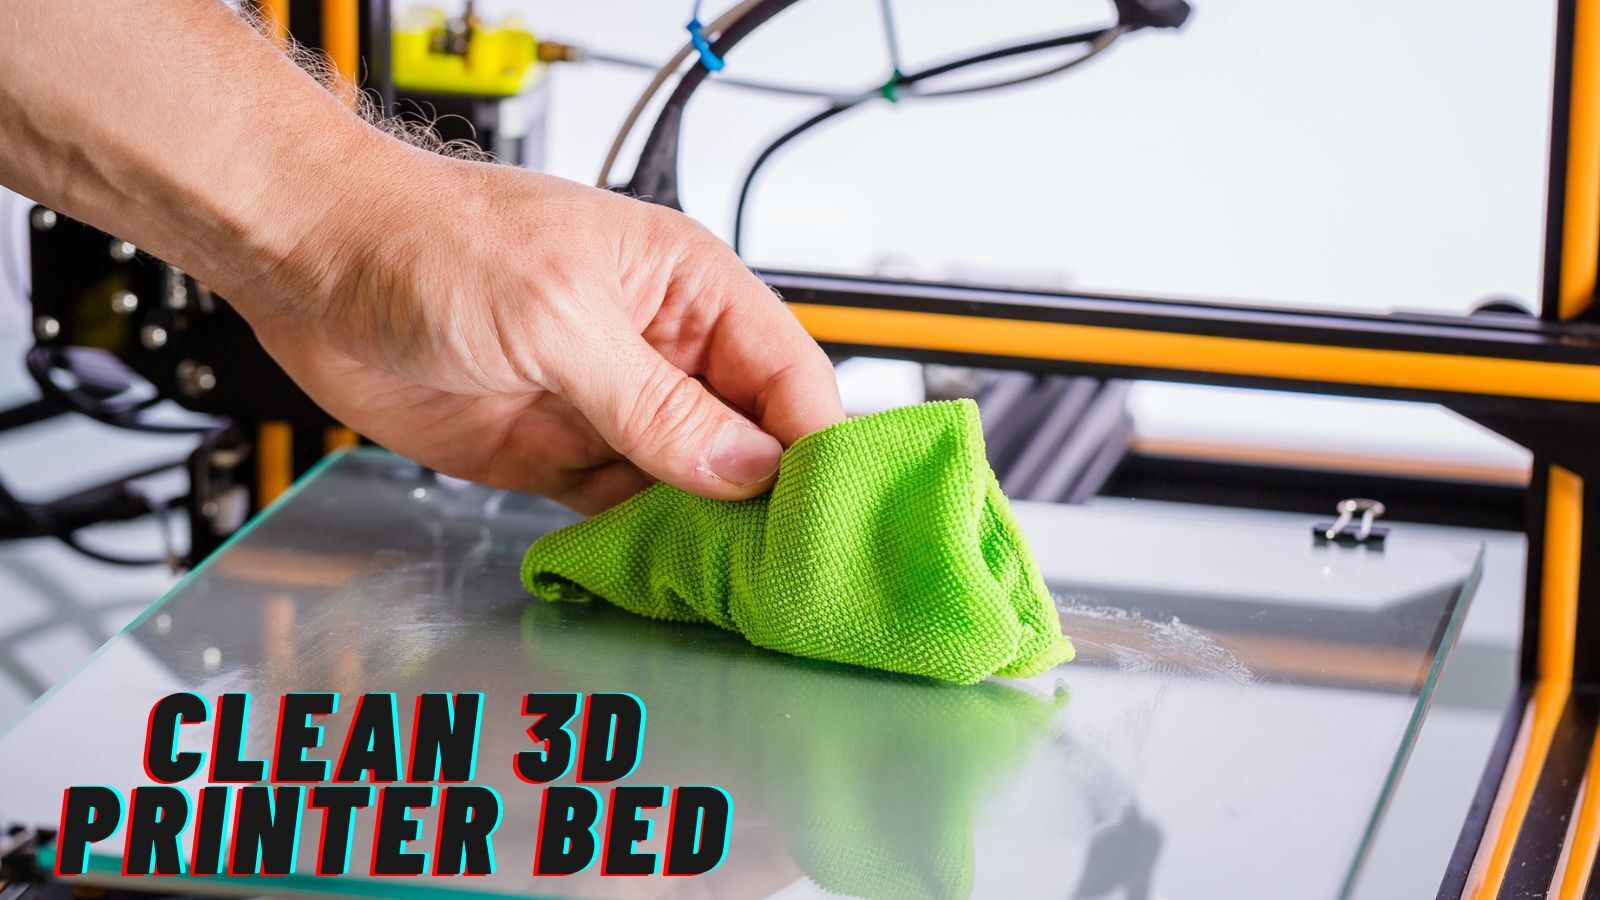 How to Clean 3d Printer Bed: 6 Easy Ways